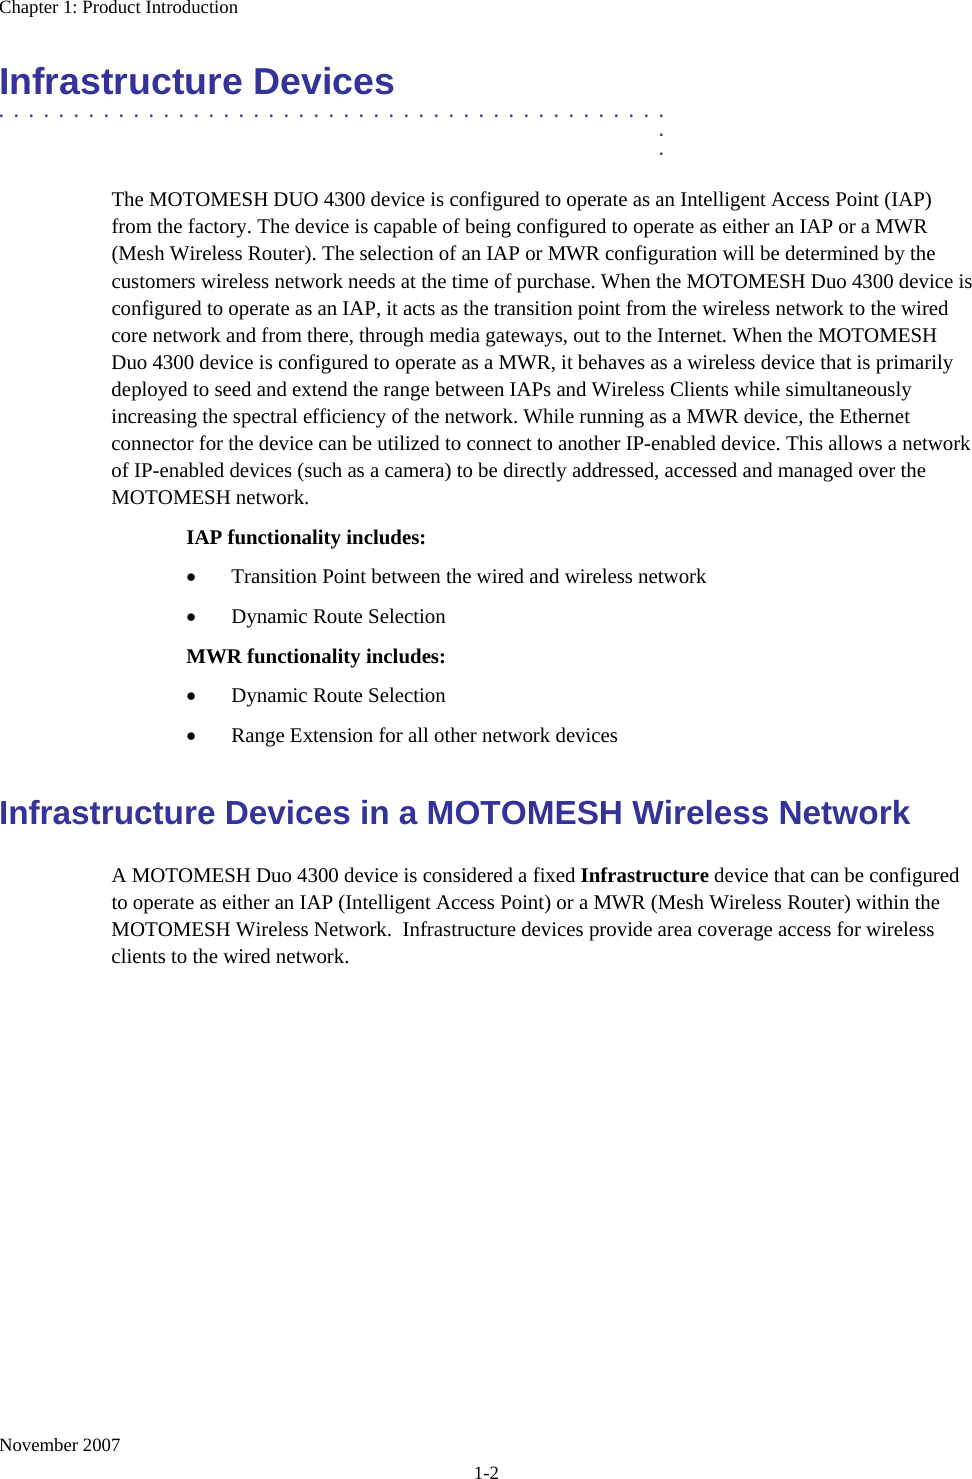 Chapter 1: Product Introduction November 2007 1-2 Infrastructure Devices .............................................  .  . The MOTOMESH DUO 4300 device is configured to operate as an Intelligent Access Point (IAP) from the factory. The device is capable of being configured to operate as either an IAP or a MWR (Mesh Wireless Router). The selection of an IAP or MWR configuration will be determined by the customers wireless network needs at the time of purchase. When the MOTOMESH Duo 4300 device is configured to operate as an IAP, it acts as the transition point from the wireless network to the wired core network and from there, through media gateways, out to the Internet. When the MOTOMESH Duo 4300 device is configured to operate as a MWR, it behaves as a wireless device that is primarily deployed to seed and extend the range between IAPs and Wireless Clients while simultaneously increasing the spectral efficiency of the network. While running as a MWR device, the Ethernet connector for the device can be utilized to connect to another IP-enabled device. This allows a network of IP-enabled devices (such as a camera) to be directly addressed, accessed and managed over the MOTOMESH network. IAP functionality includes: • Transition Point between the wired and wireless network • Dynamic Route Selection MWR functionality includes: • Dynamic Route Selection • Range Extension for all other network devices Infrastructure Devices in a MOTOMESH Wireless Network A MOTOMESH Duo 4300 device is considered a fixed Infrastructure device that can be configured to operate as either an IAP (Intelligent Access Point) or a MWR (Mesh Wireless Router) within the MOTOMESH Wireless Network.  Infrastructure devices provide area coverage access for wireless clients to the wired network.  